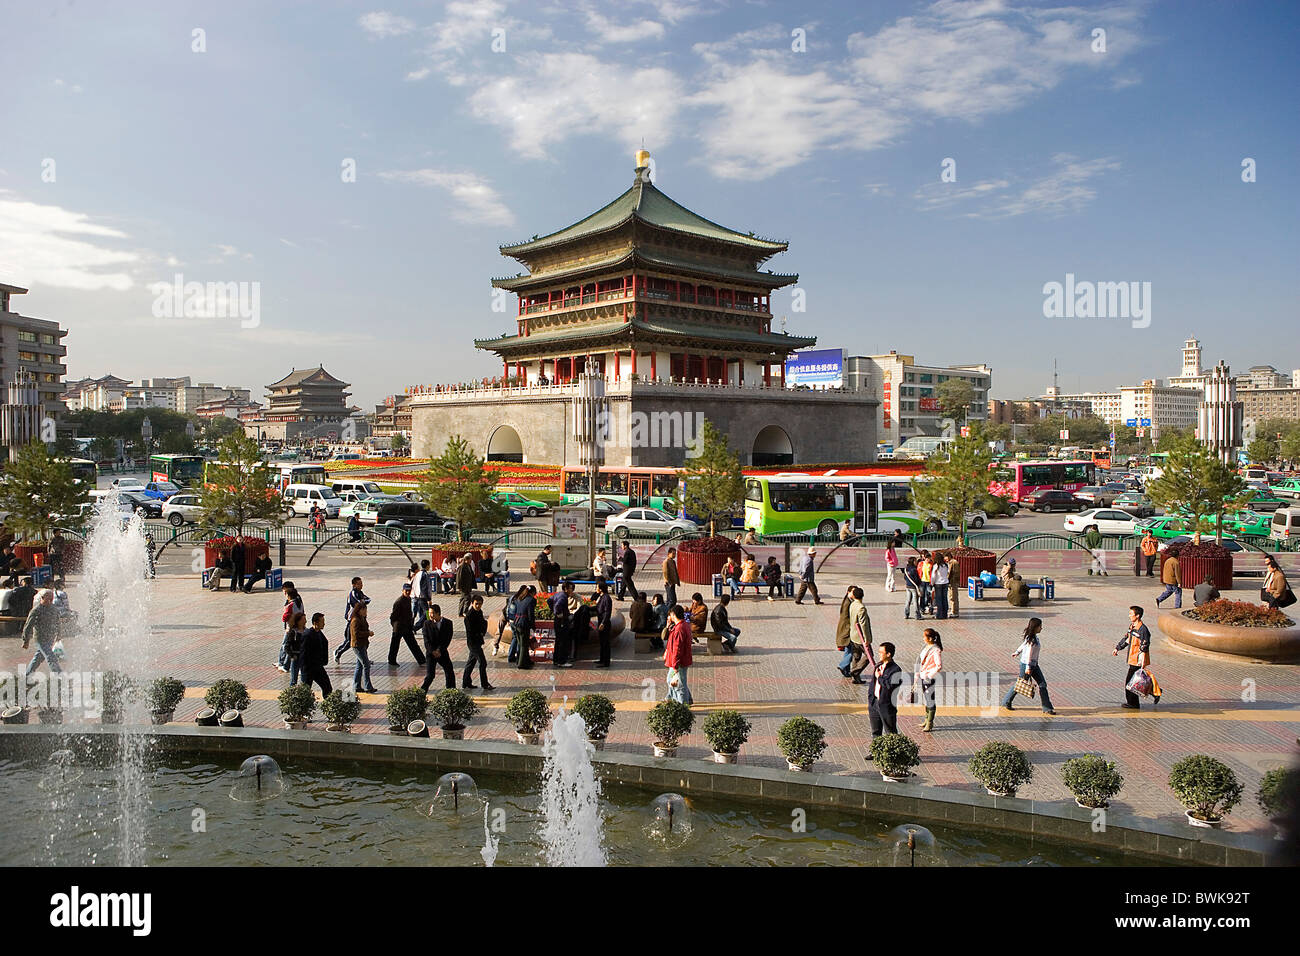 China Asia Silk Road province Shaanxi Xian Xi'an town city bell tower belfry place space person historica Stock Photo